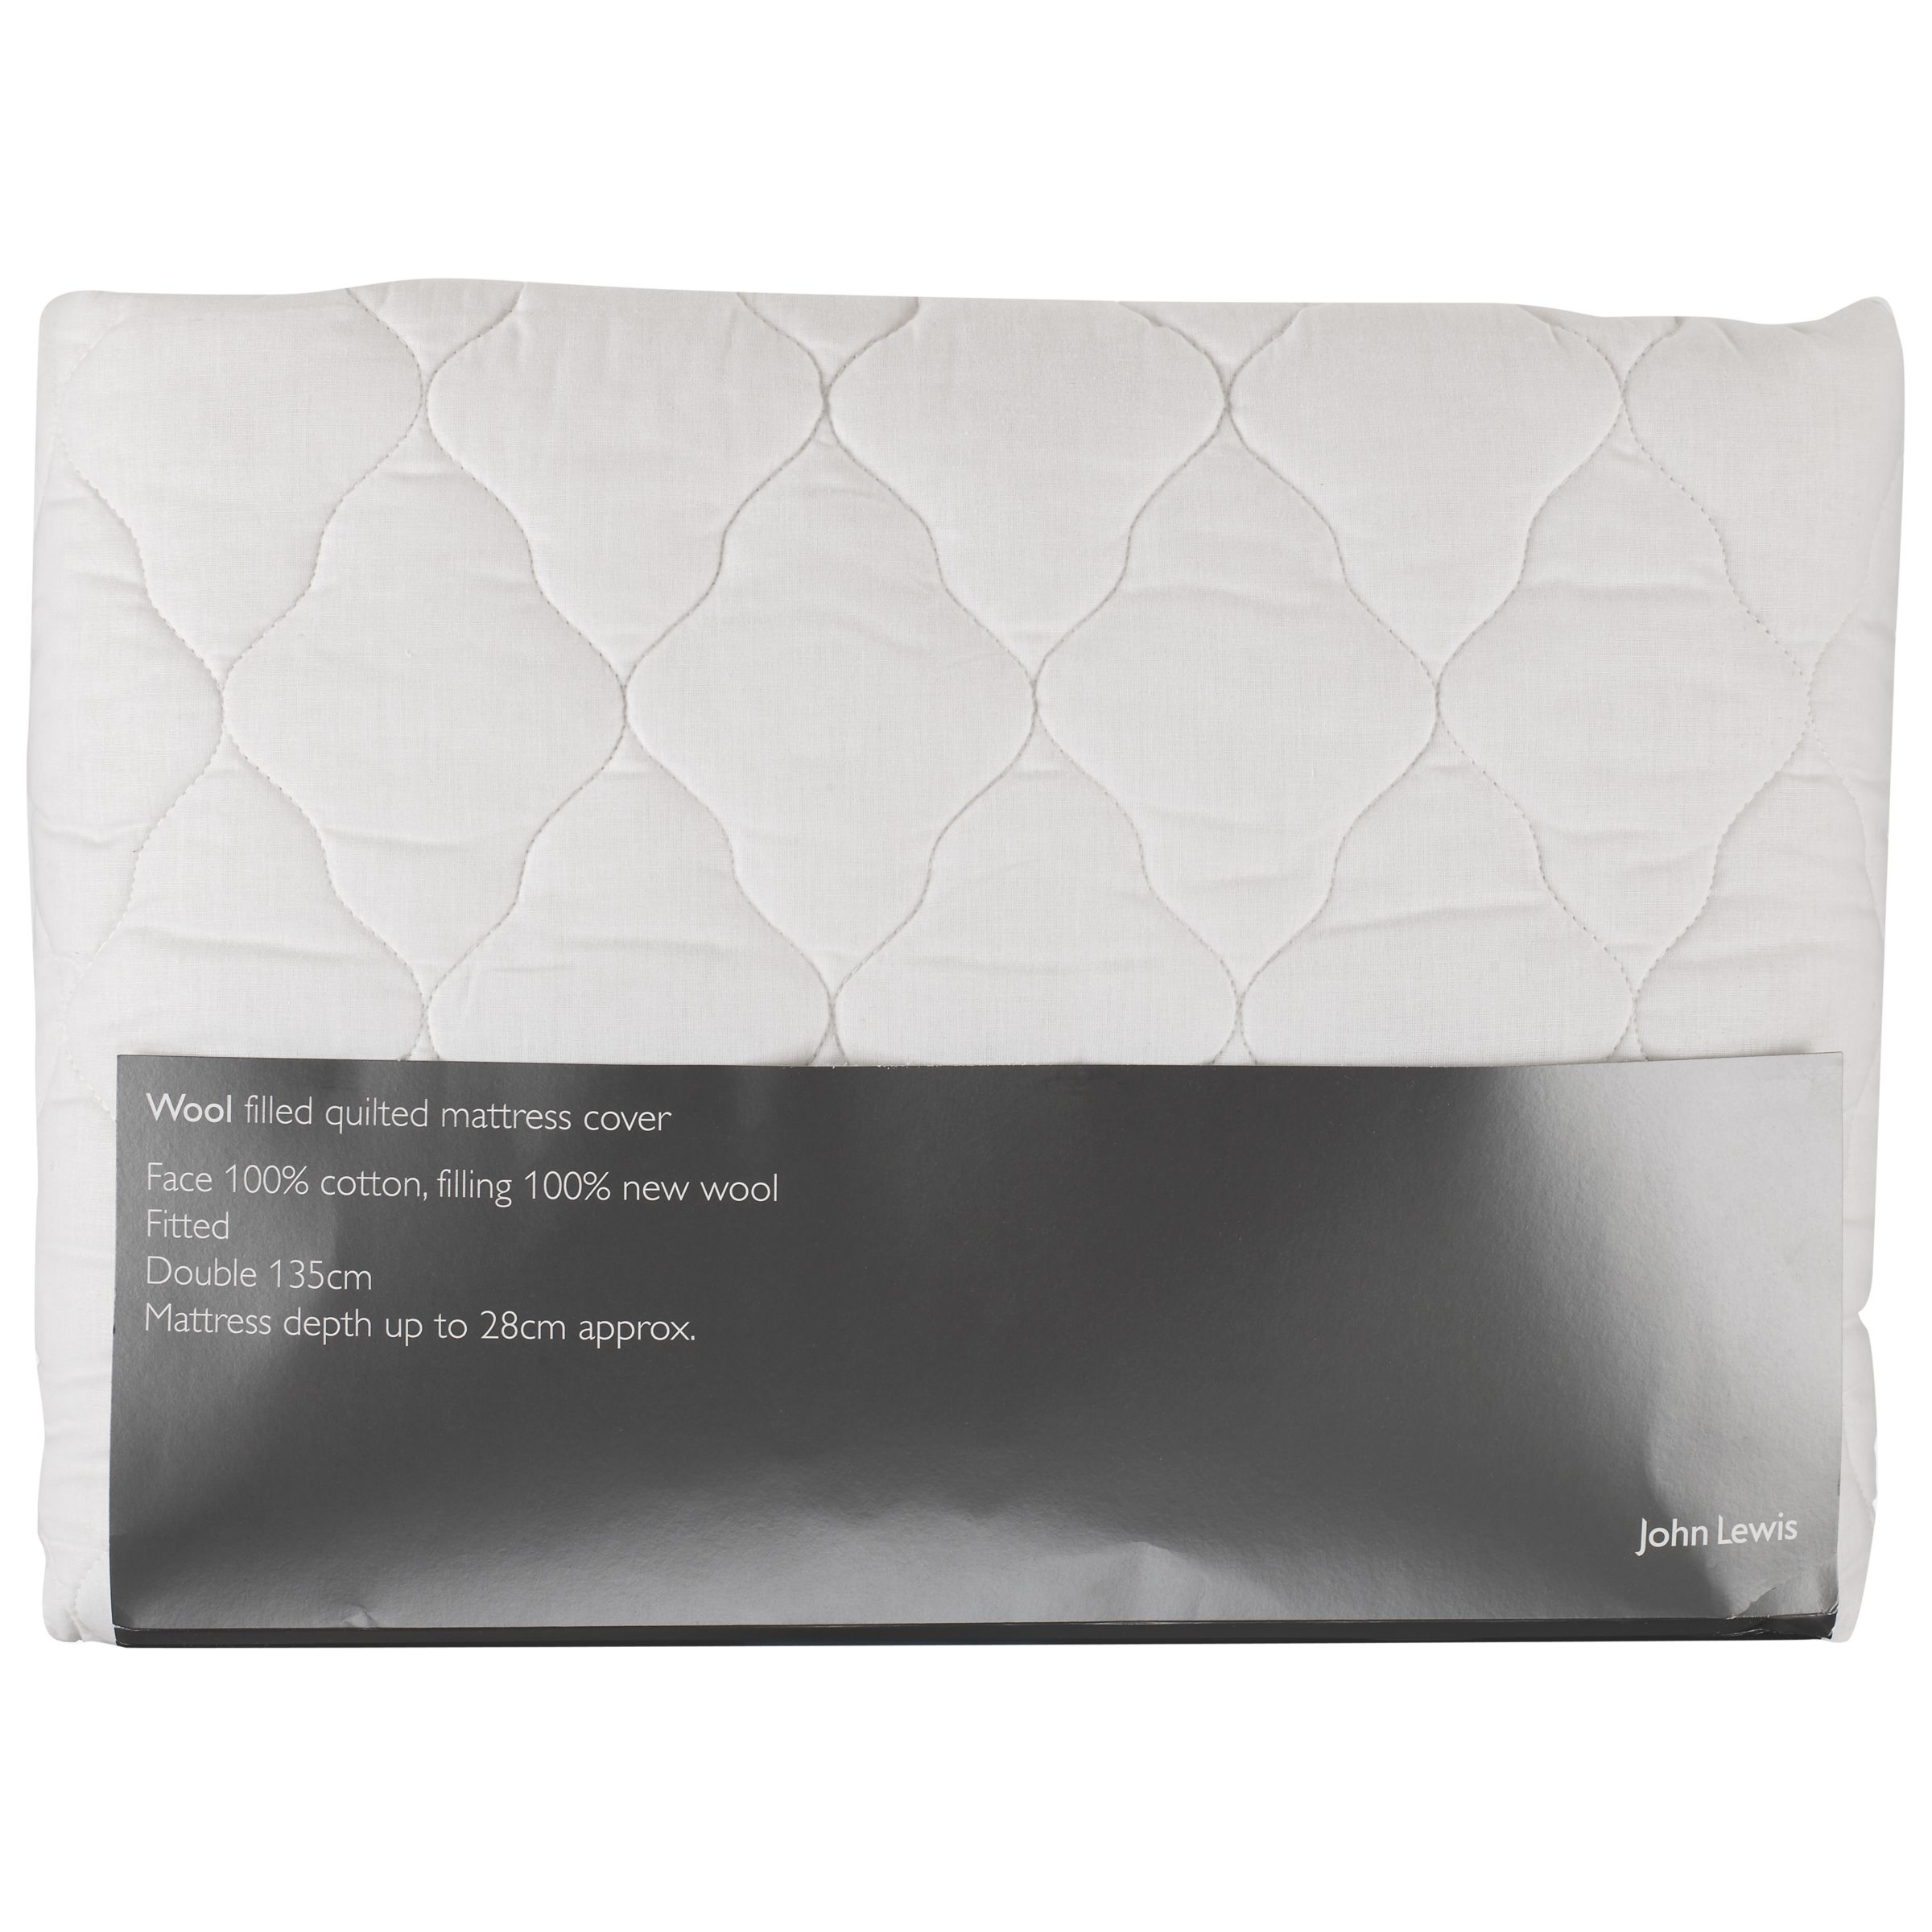 John Lewis Wool Filled Quilted Mattress Protector, Single